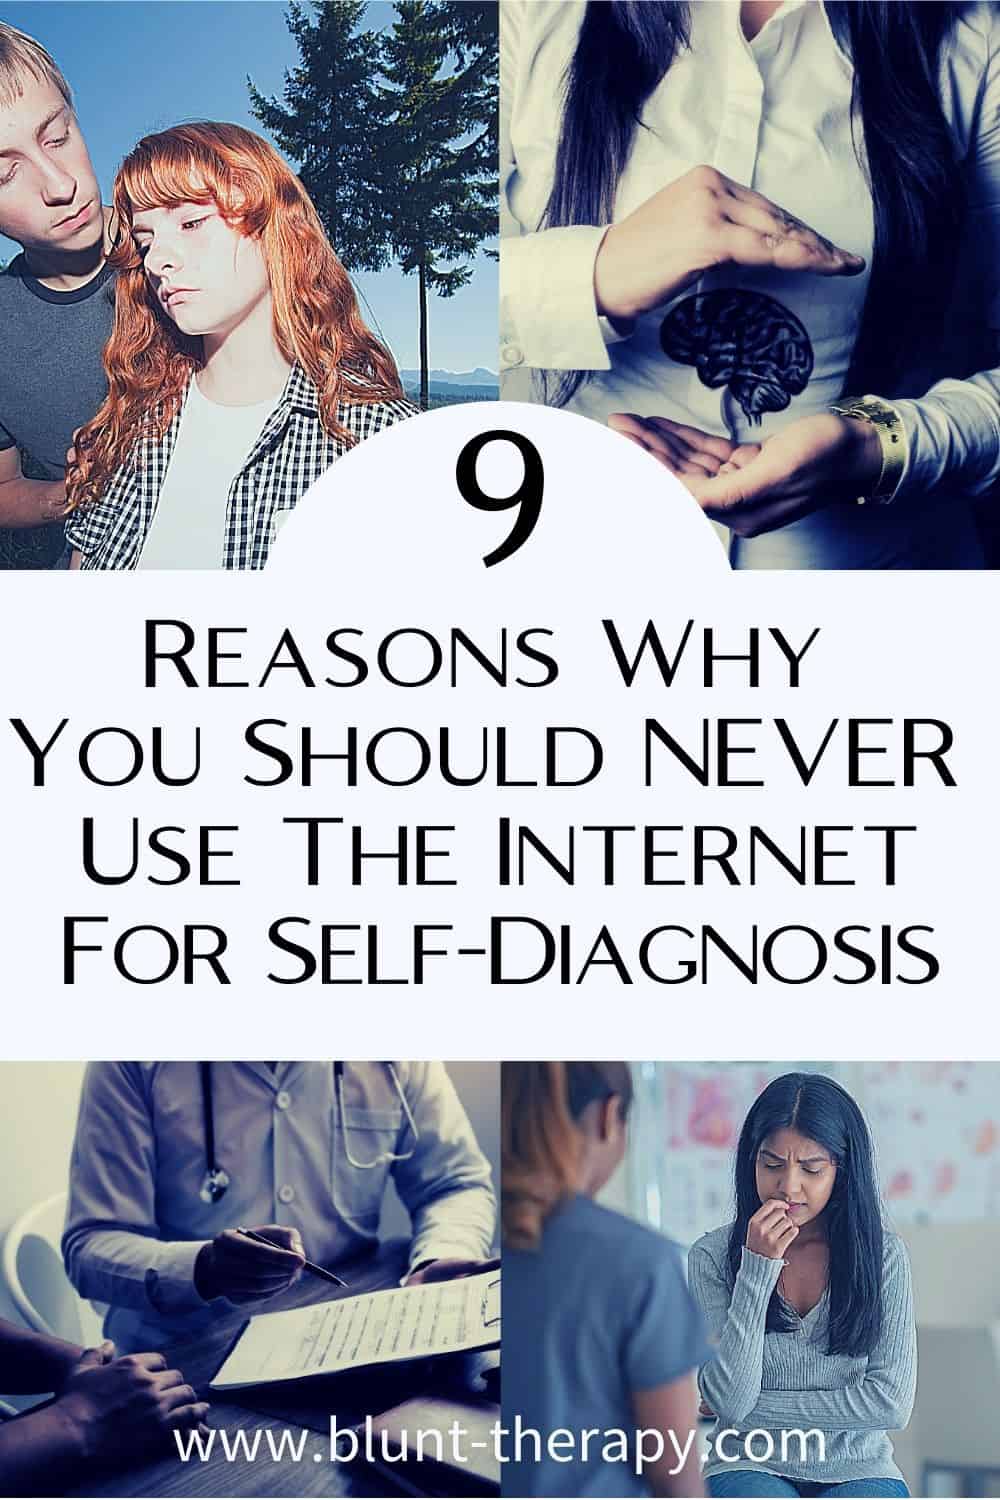 9 Reasons Why You Should NEVER Use The Internet For Self-Diagnosis